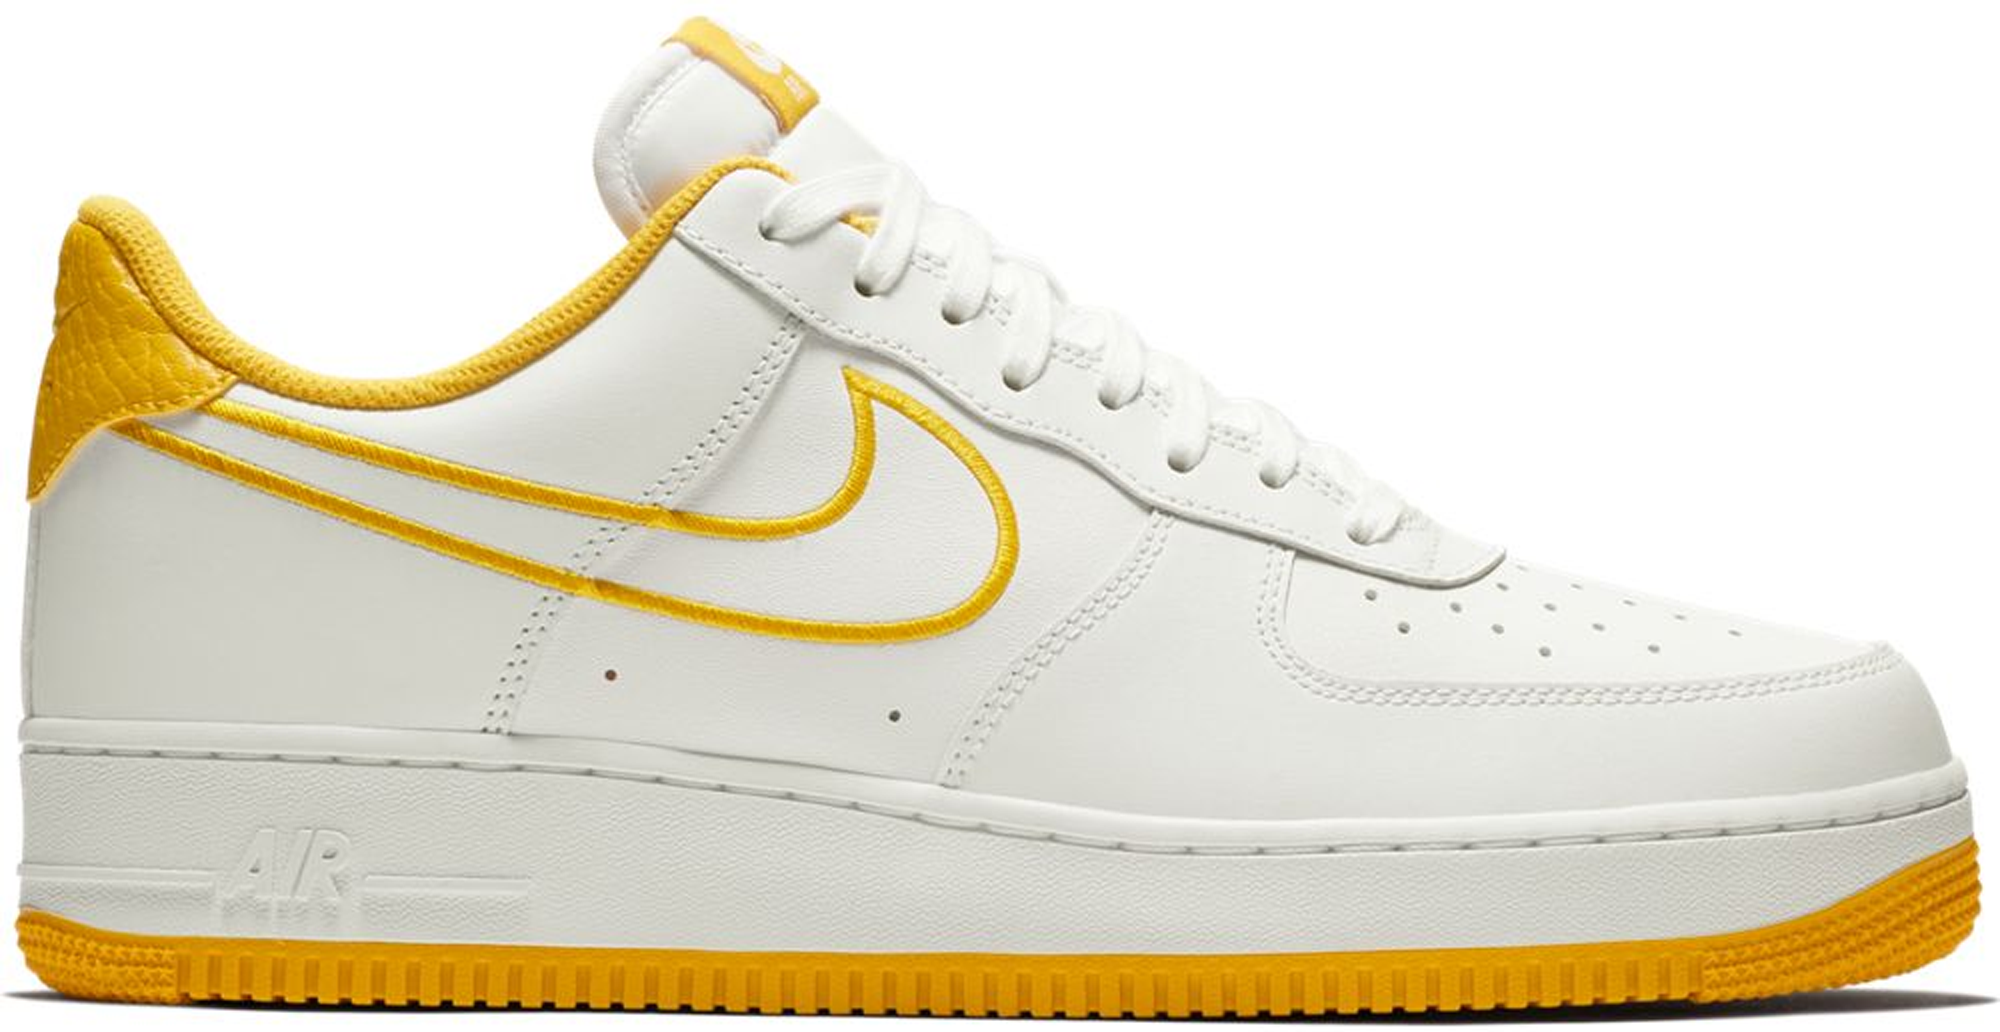 yellow air force shoes